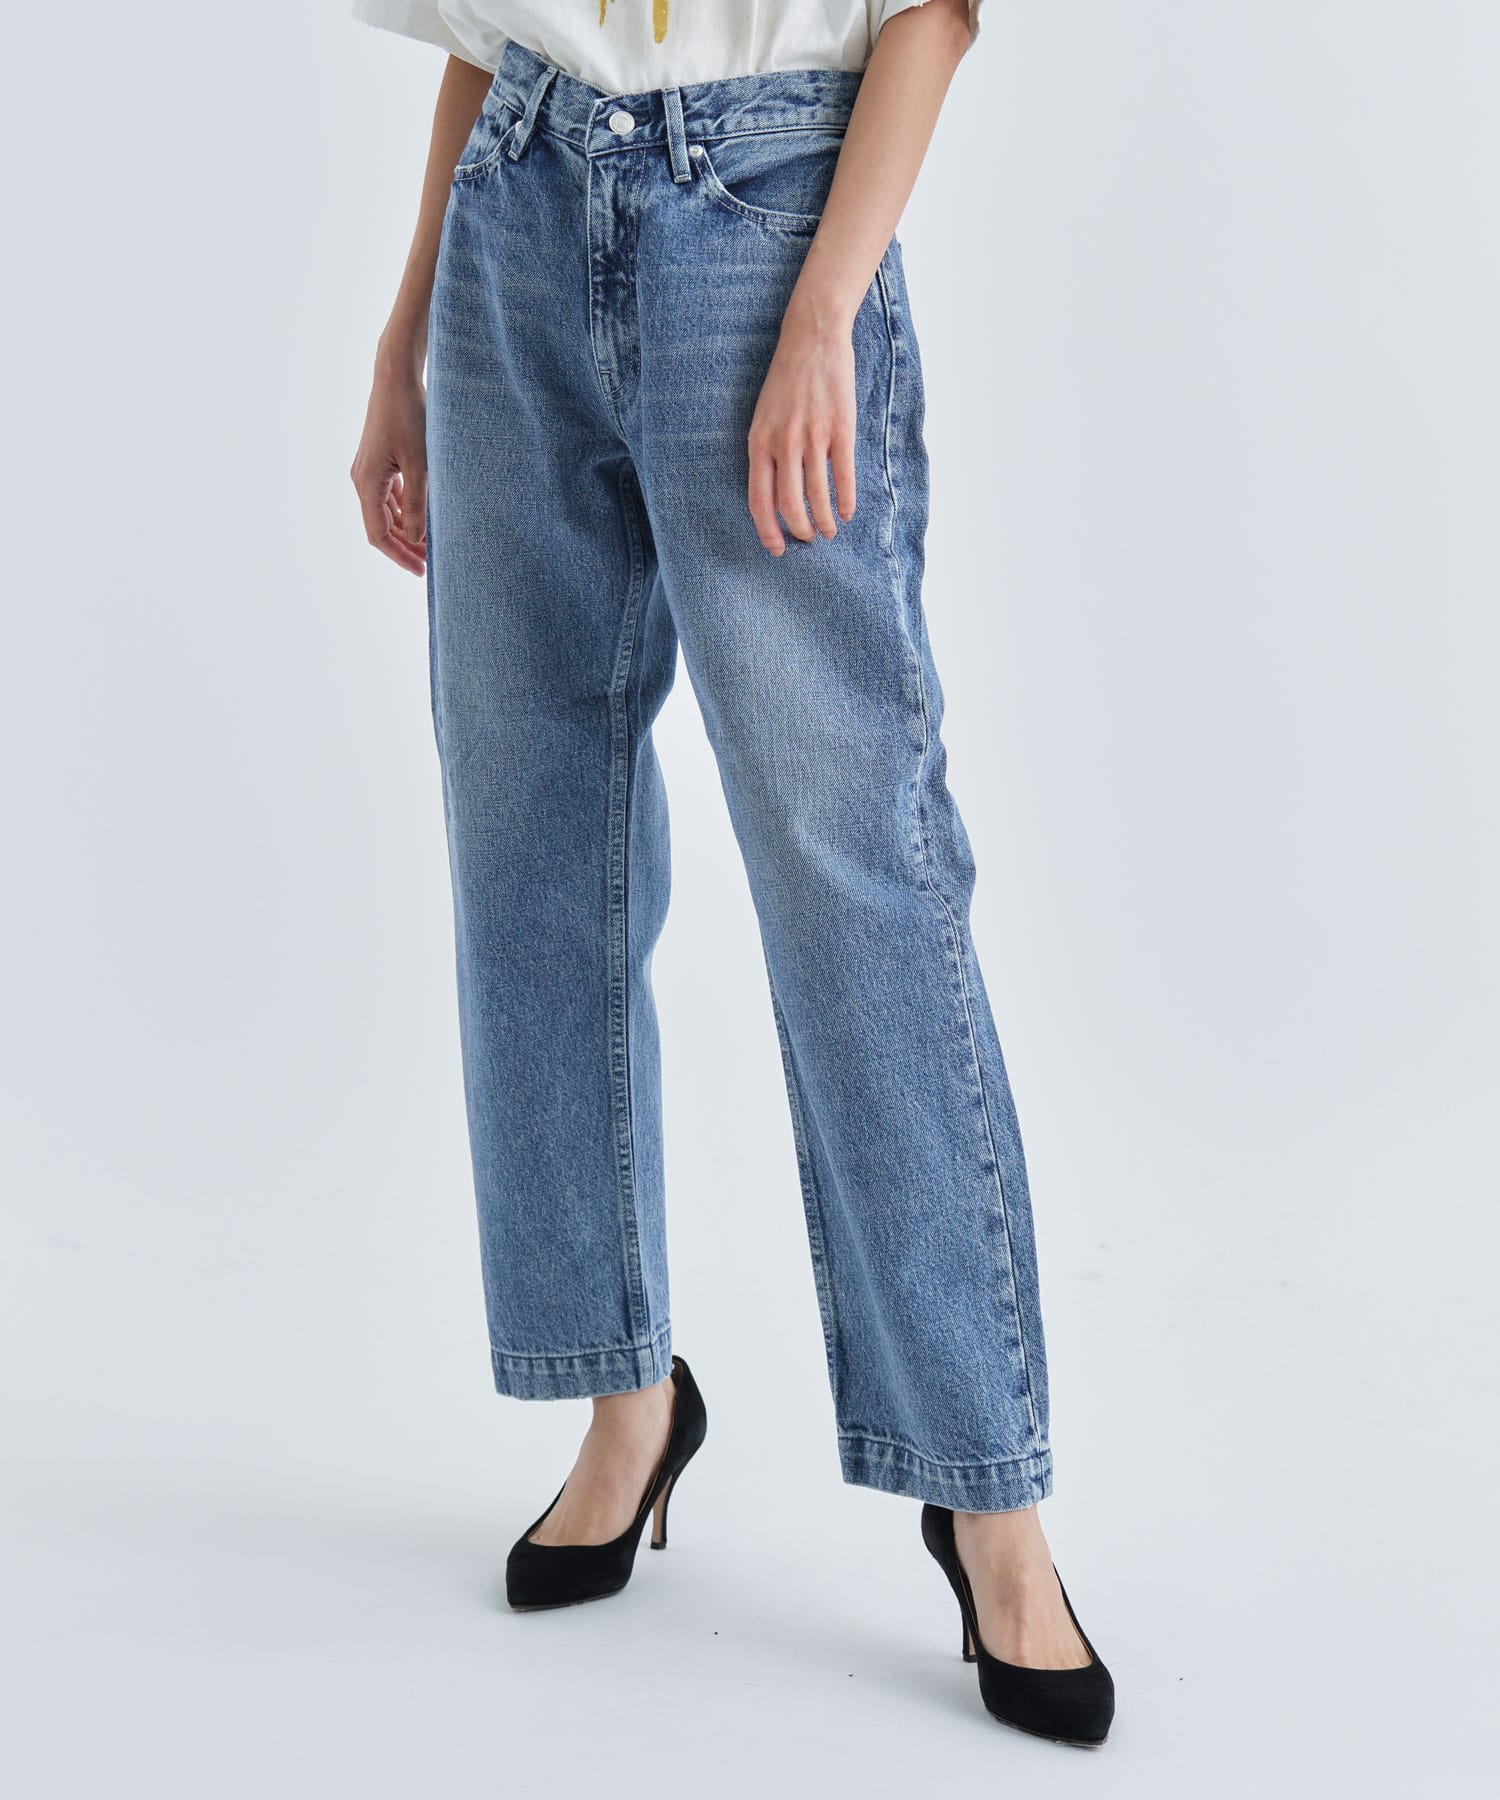 THE SKATE JEAN TROUSERS